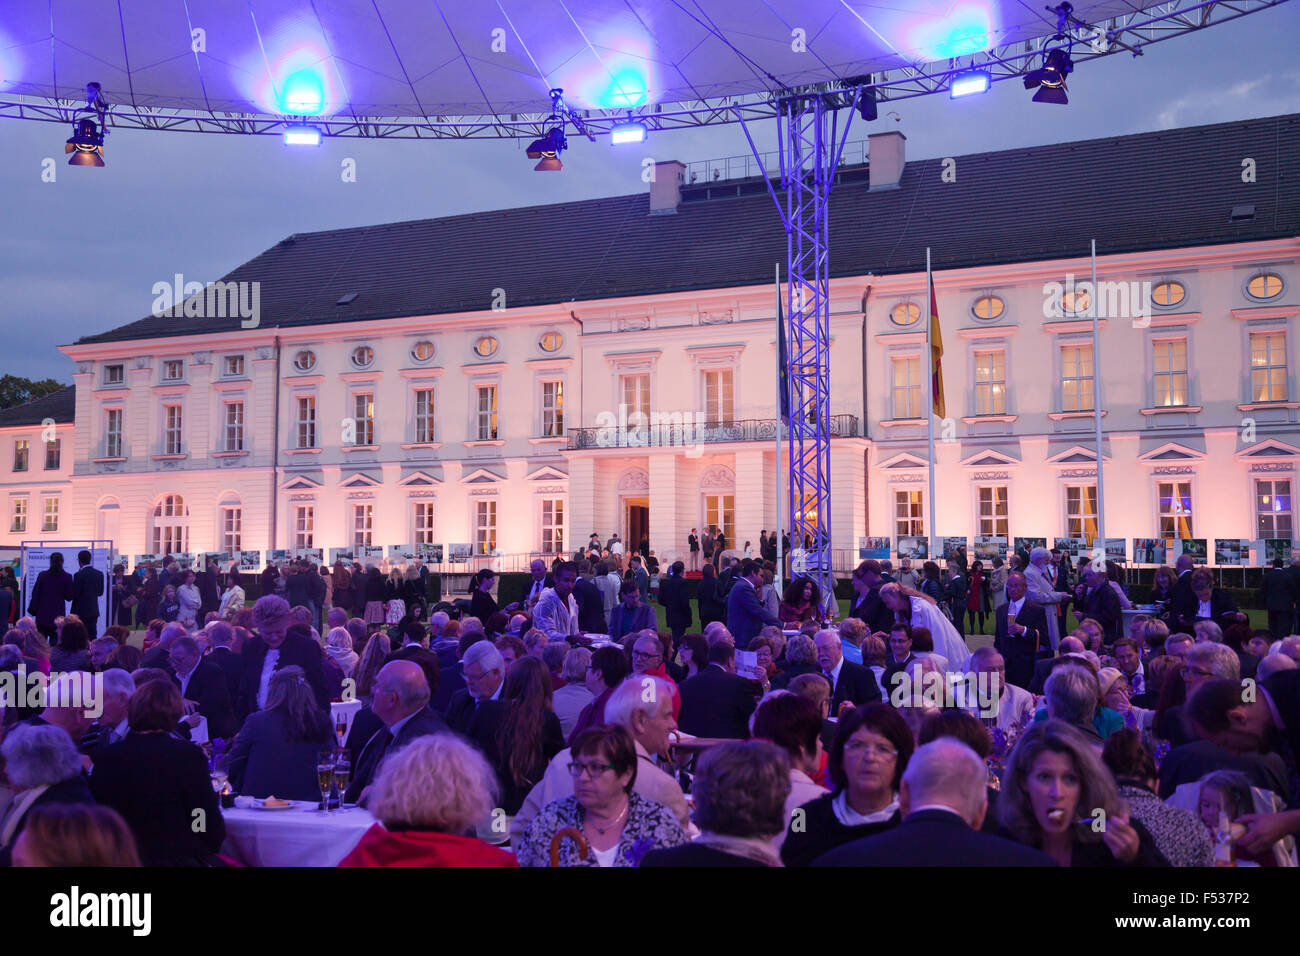 annual Citizens' Fest at Bellevue Palace, Berlin, Germany Stock Photo